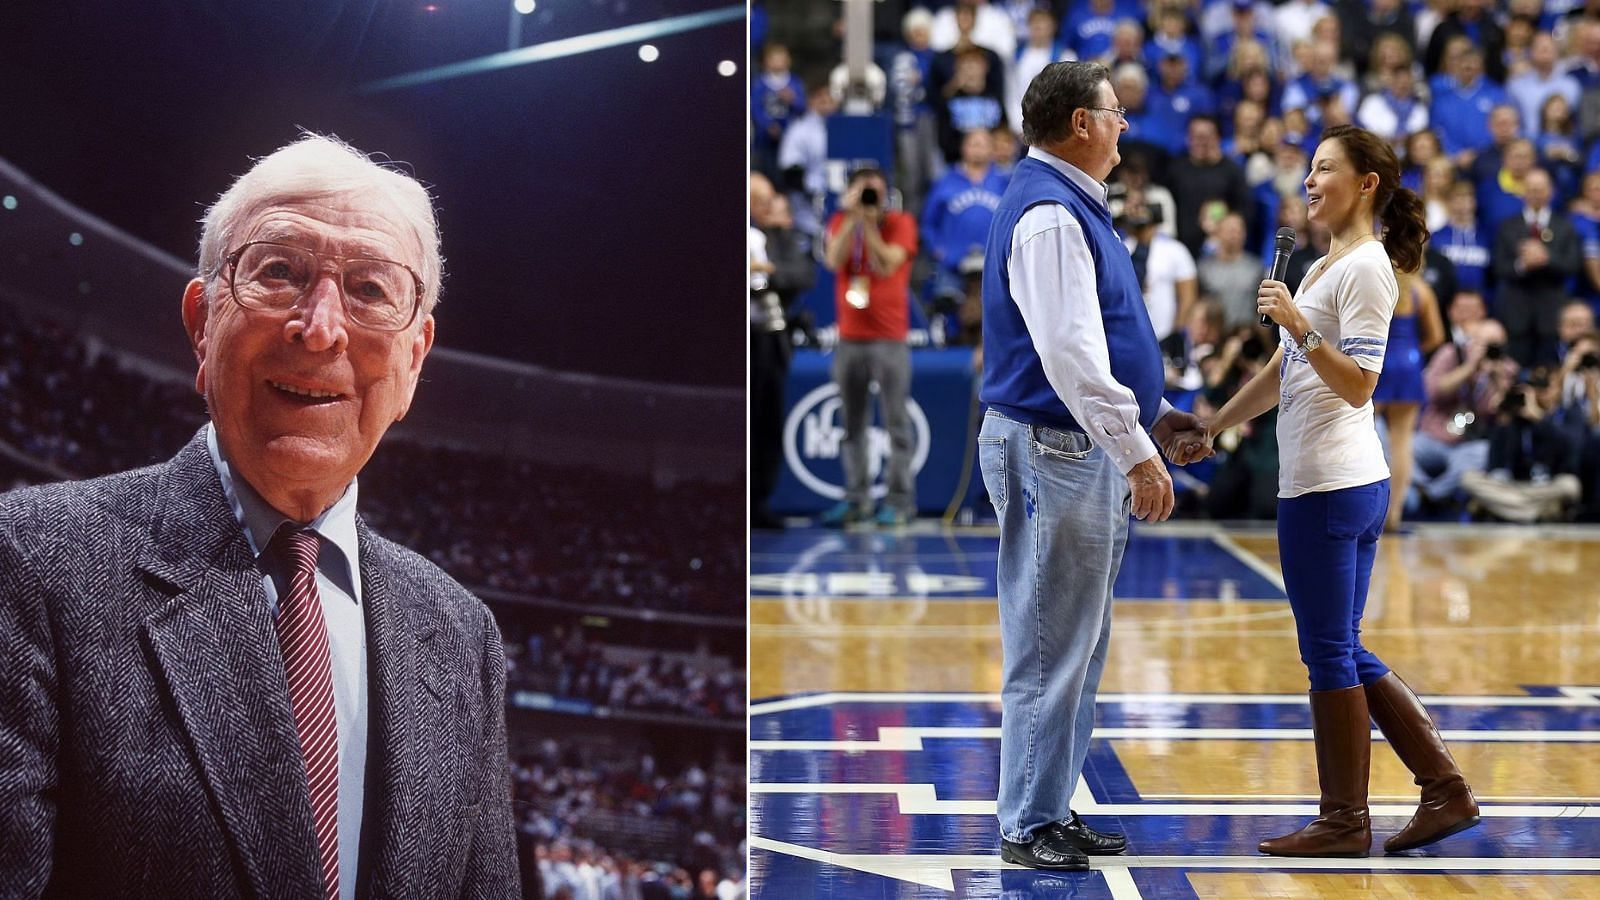 Legendary UCLA coach John Wooden was part of three of the highest scoring title games in history, while Kentucky coach Joe B. Hall (shown here with Ashley Judd) coached in two of those high-scoring games.